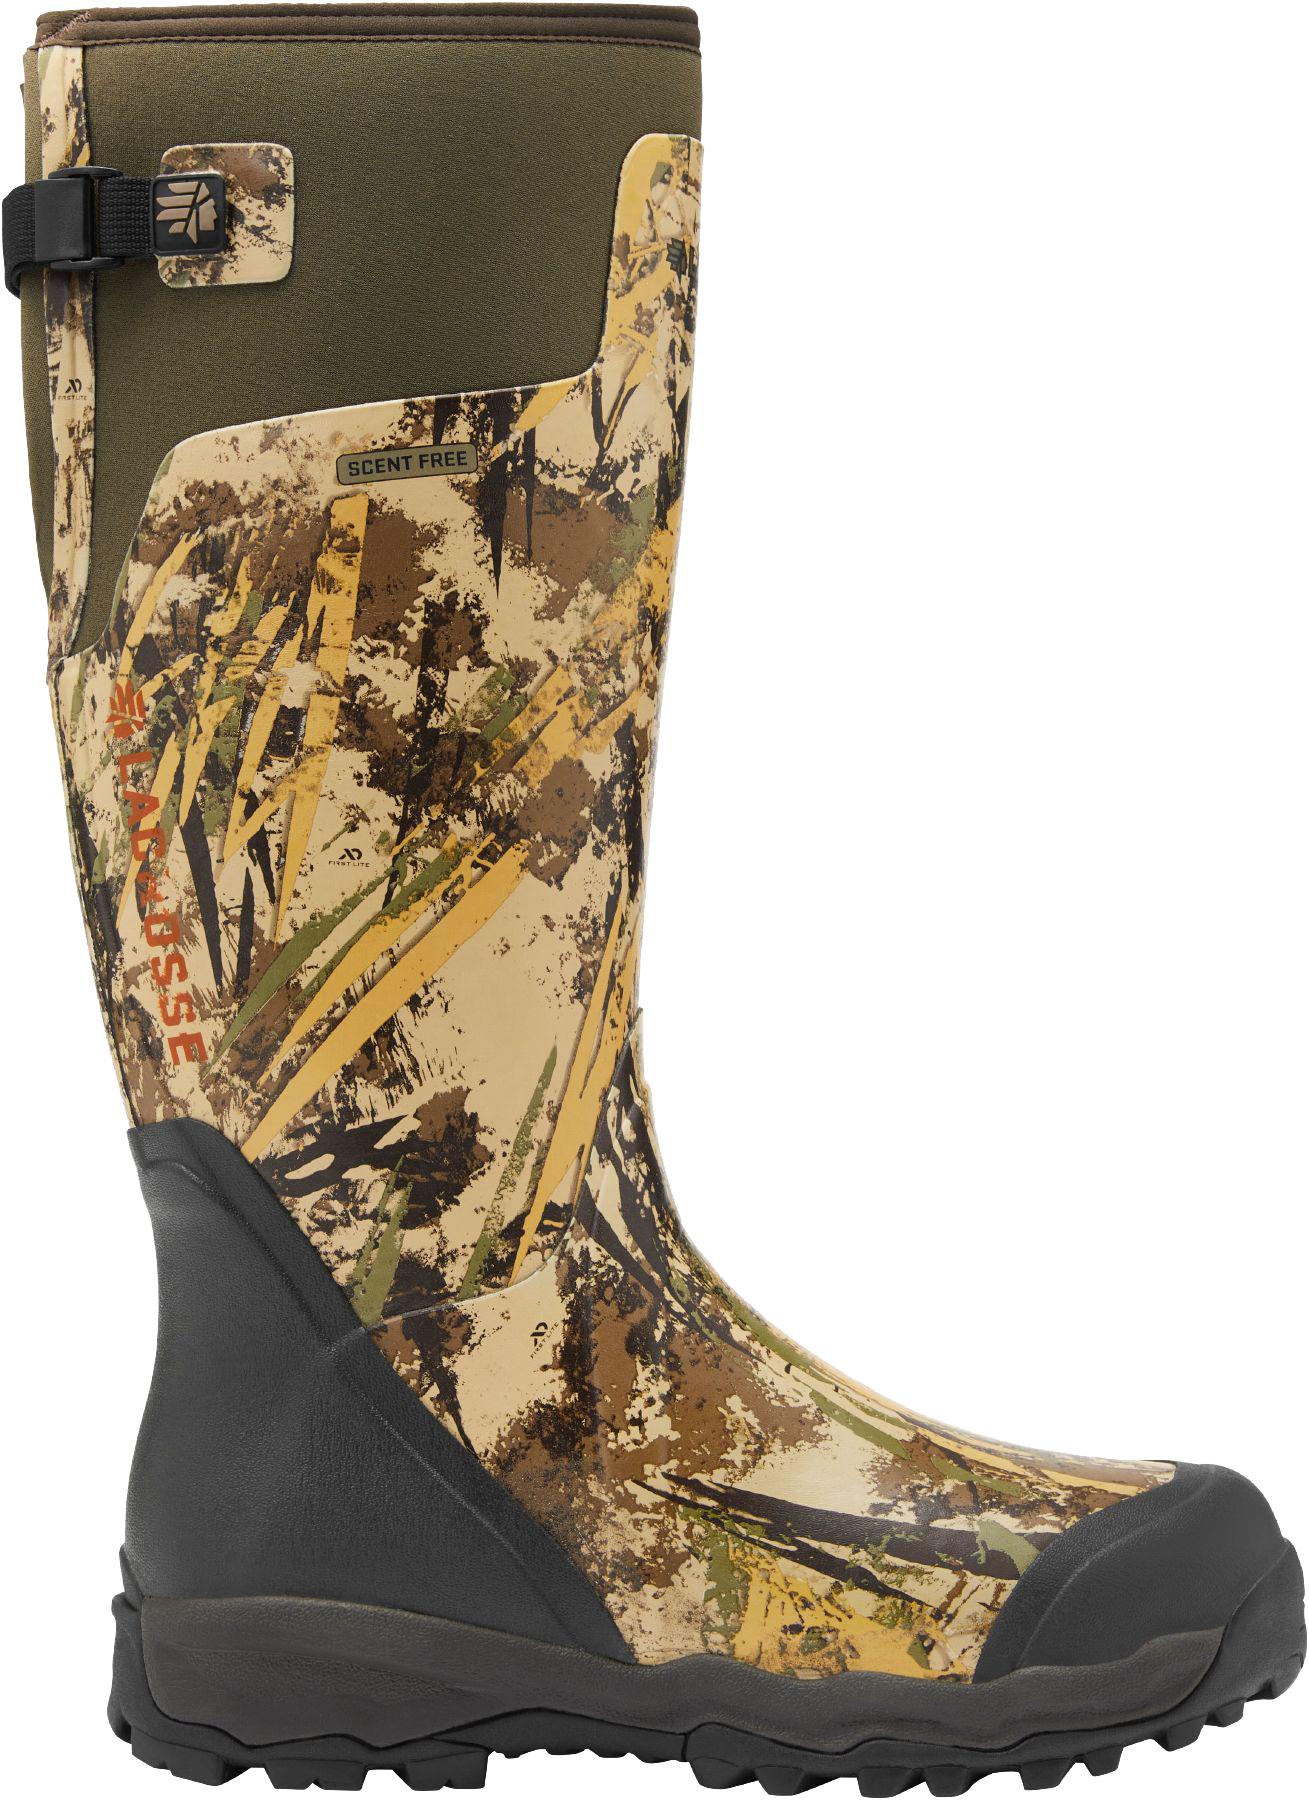 LaCrosse AlphaBurly Pro Hunting Boots for Men - First Lite Typha - 8M